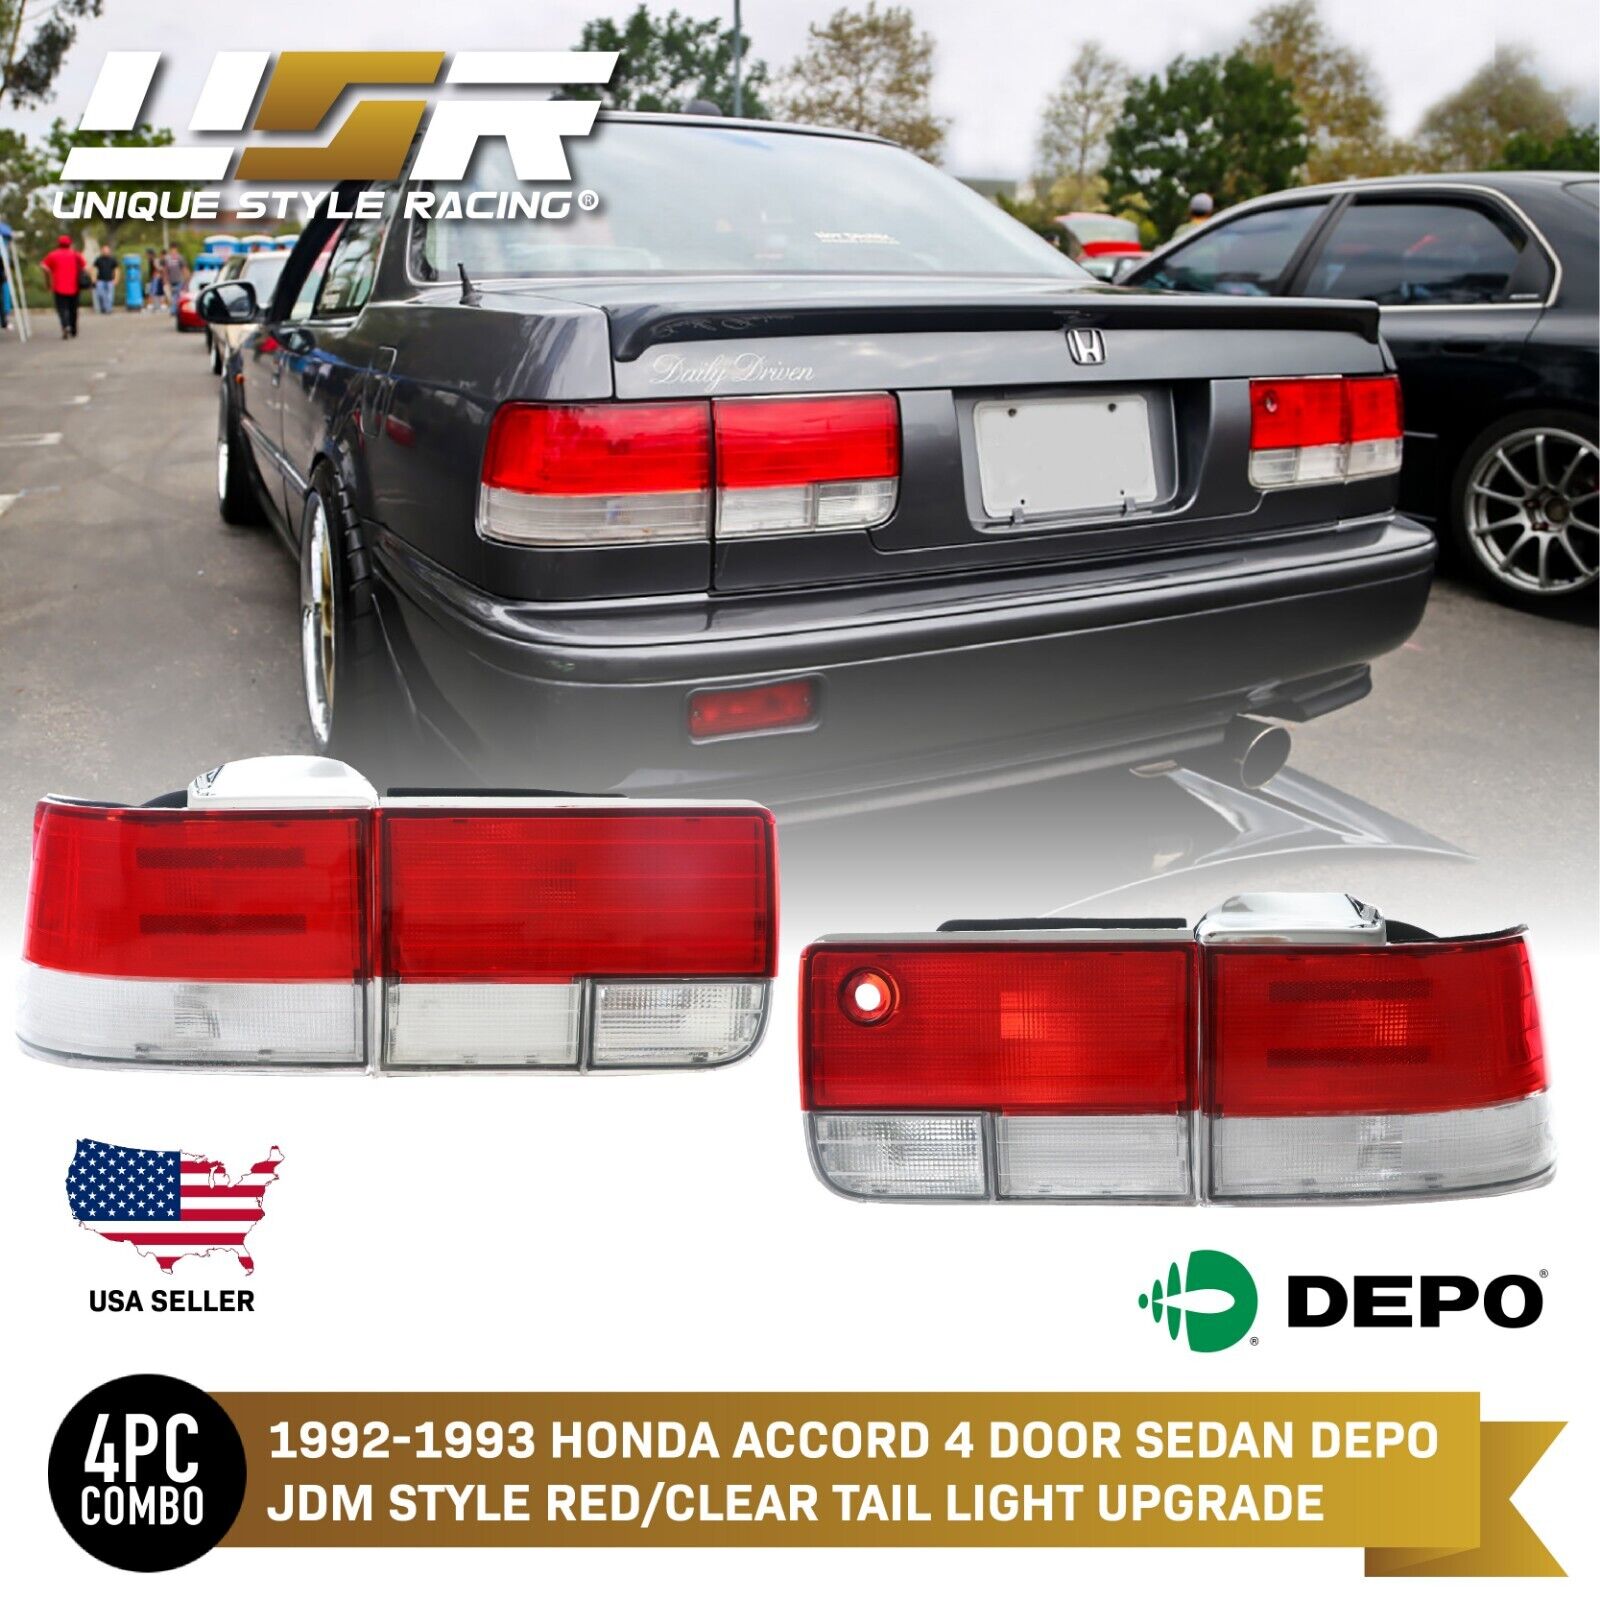 DEPO JDM RED / CLEAR Rear 4 Pieces Tail Light Set For 1992-1993 Honda Accord 4D